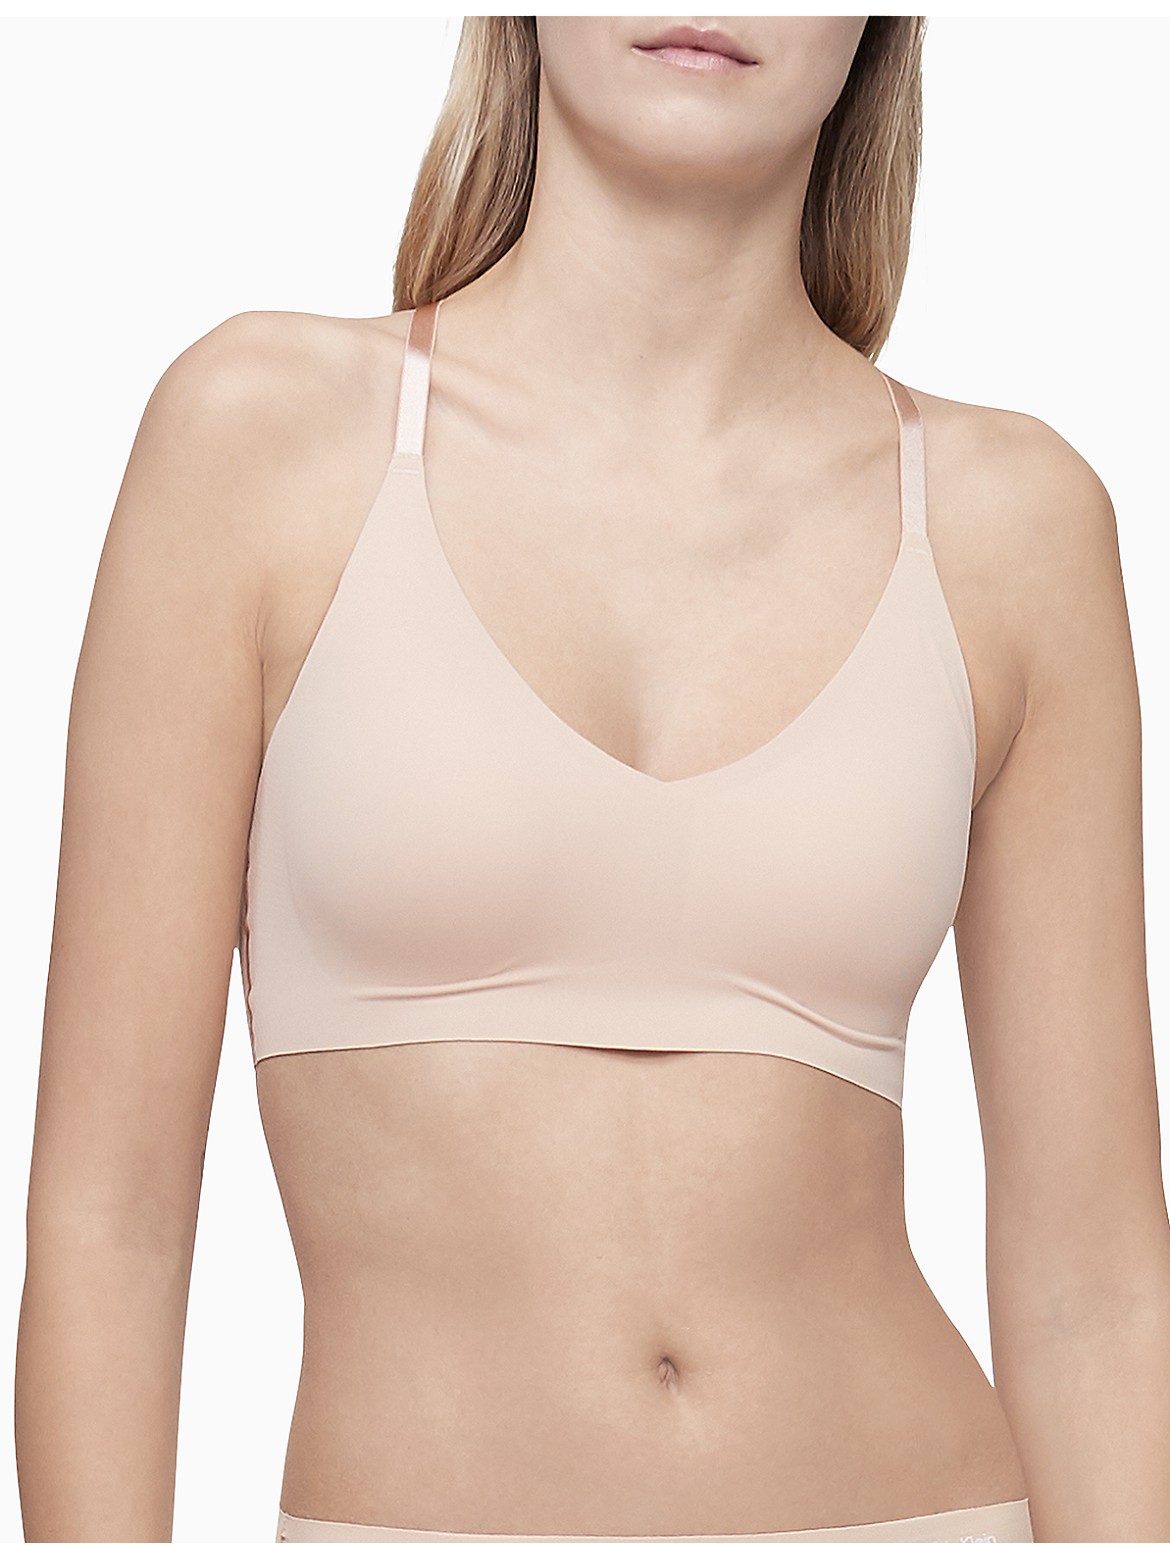 Calvin Klein Women's Invisibles Lace Lightly Lined Bralette - Neutral - L